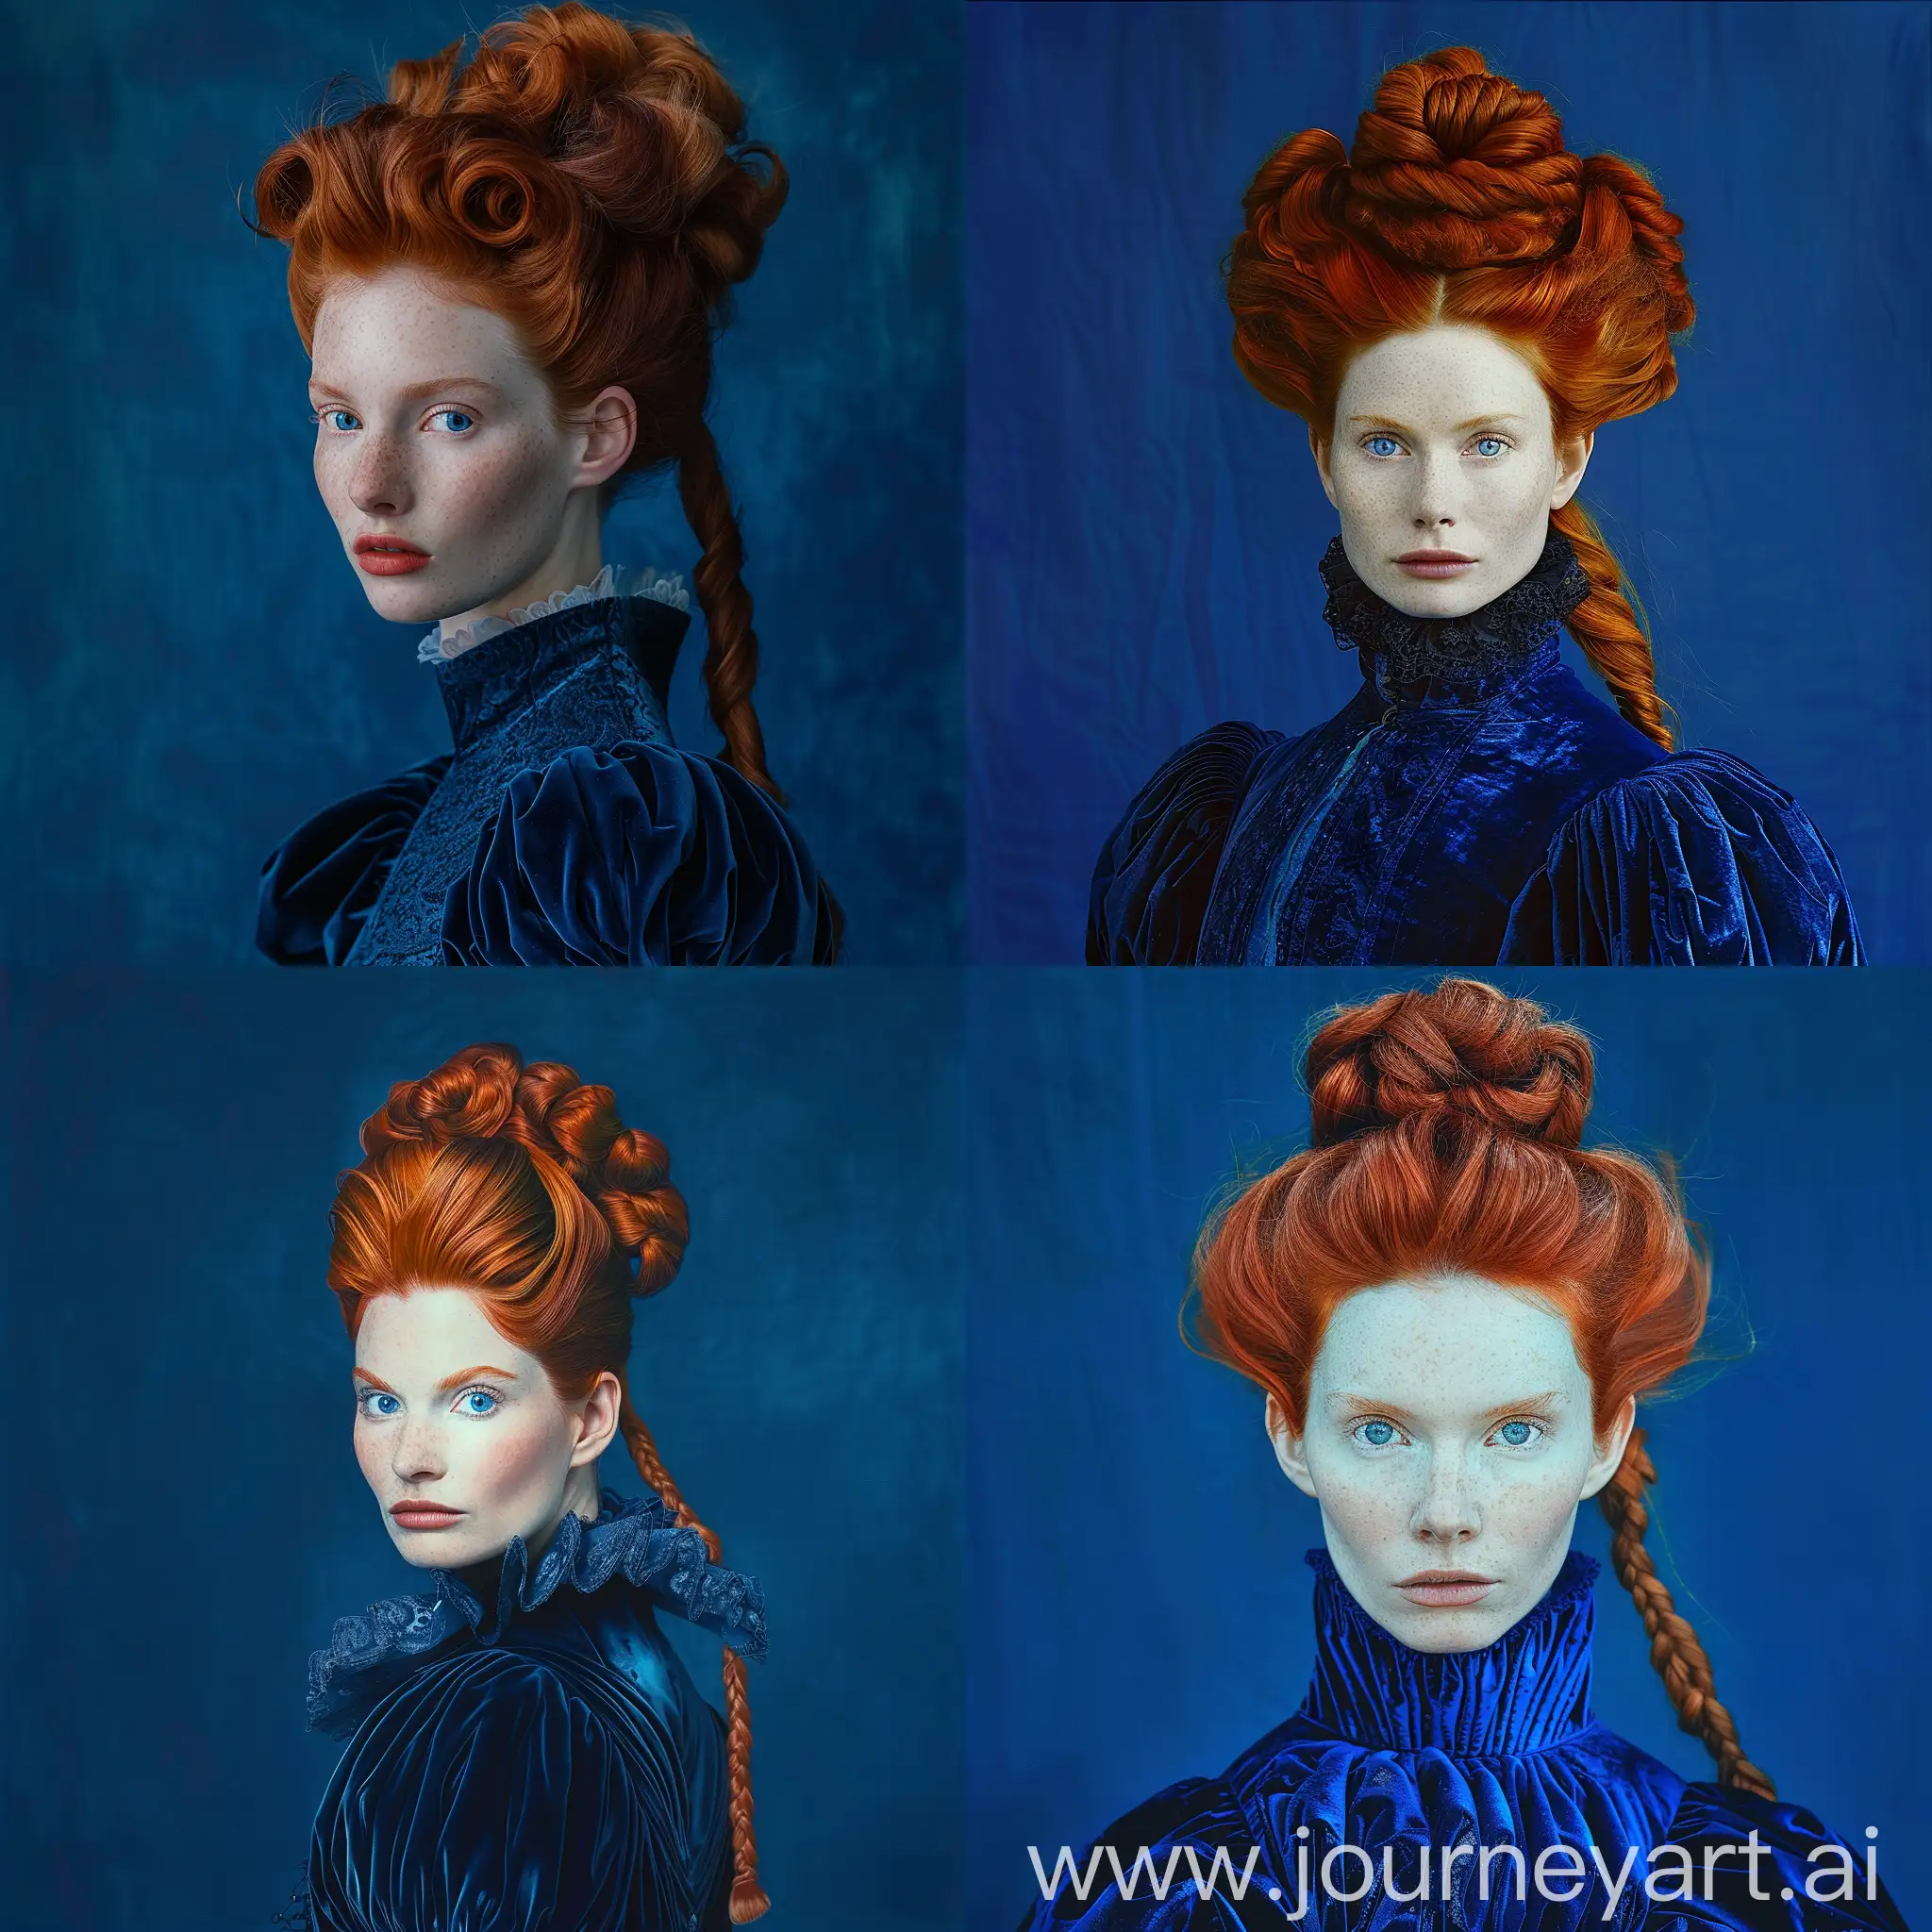 To recreate this image on Midjourney, you can use the following detailed description:

---

A striking portrait of a woman with fair skin and piercing blue eyes. She has vibrant red hair, styled elaborately with a high, voluminous bun on top and a long loose braid falling over her right shoulder. Her expression is serious and determined, conveying a sense of strength and resolve. She is dressed in a dark blue, possibly velvet, Elizabethan-era costume with rich and ornate details. The background is a deep blue, complementing her hair and attire, creating a dramatic contrast that highlights her face. --v 6

---

This should help guide the AI to produce an image similar to the one you provided.